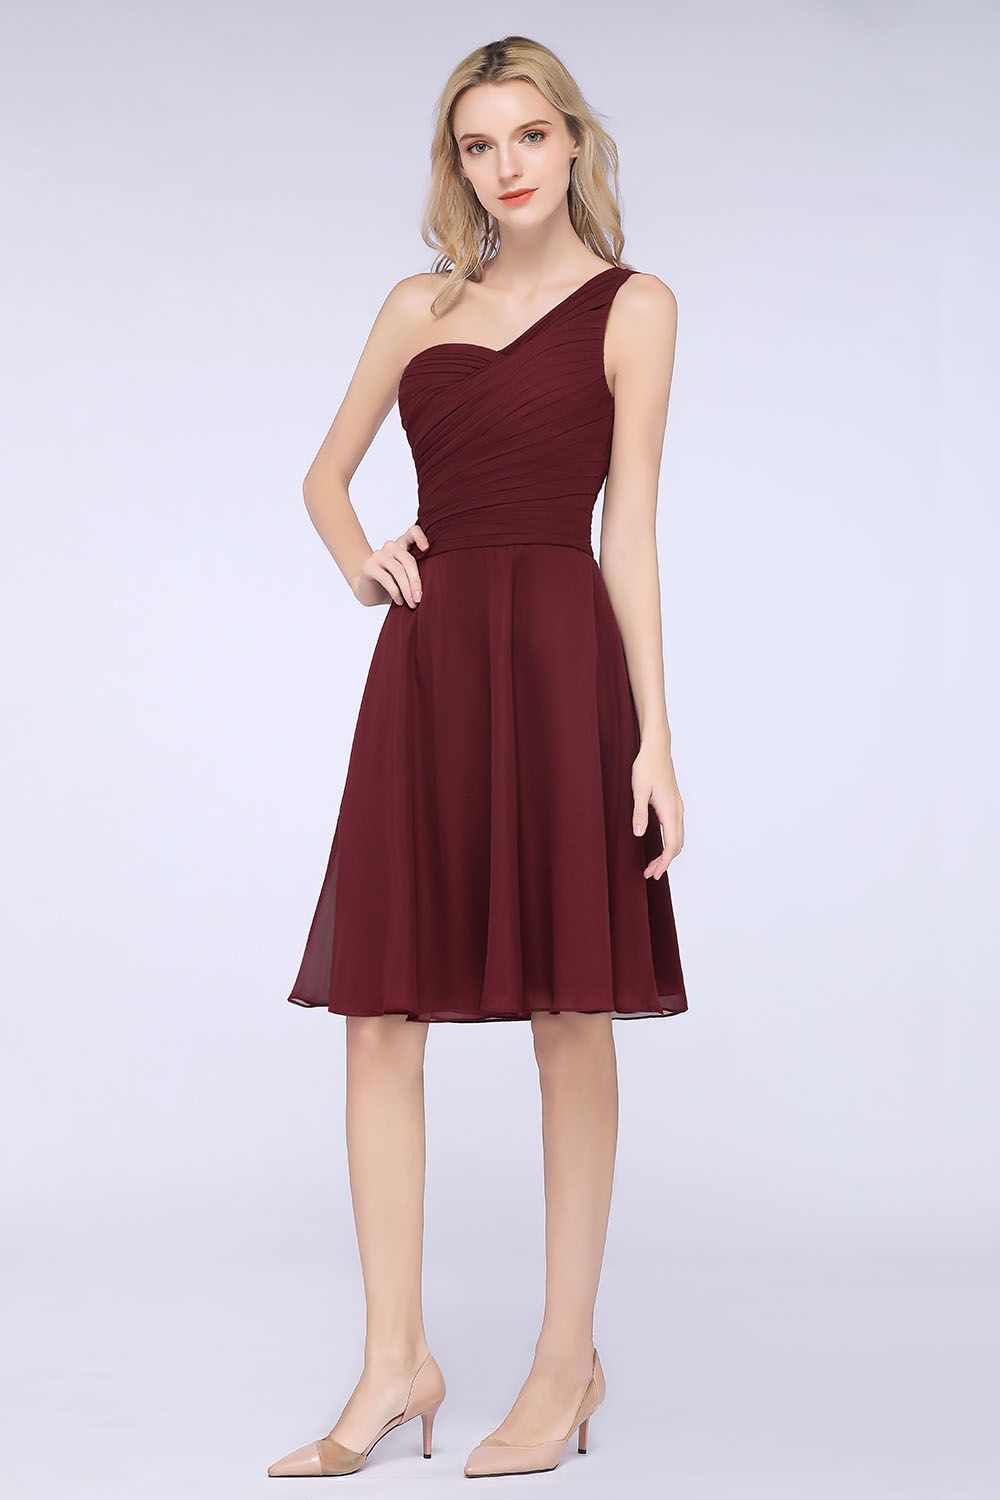 Chic One-Shoulder Short Burgundy Affordable Bridesmaid Dress with Ruffle-27dress